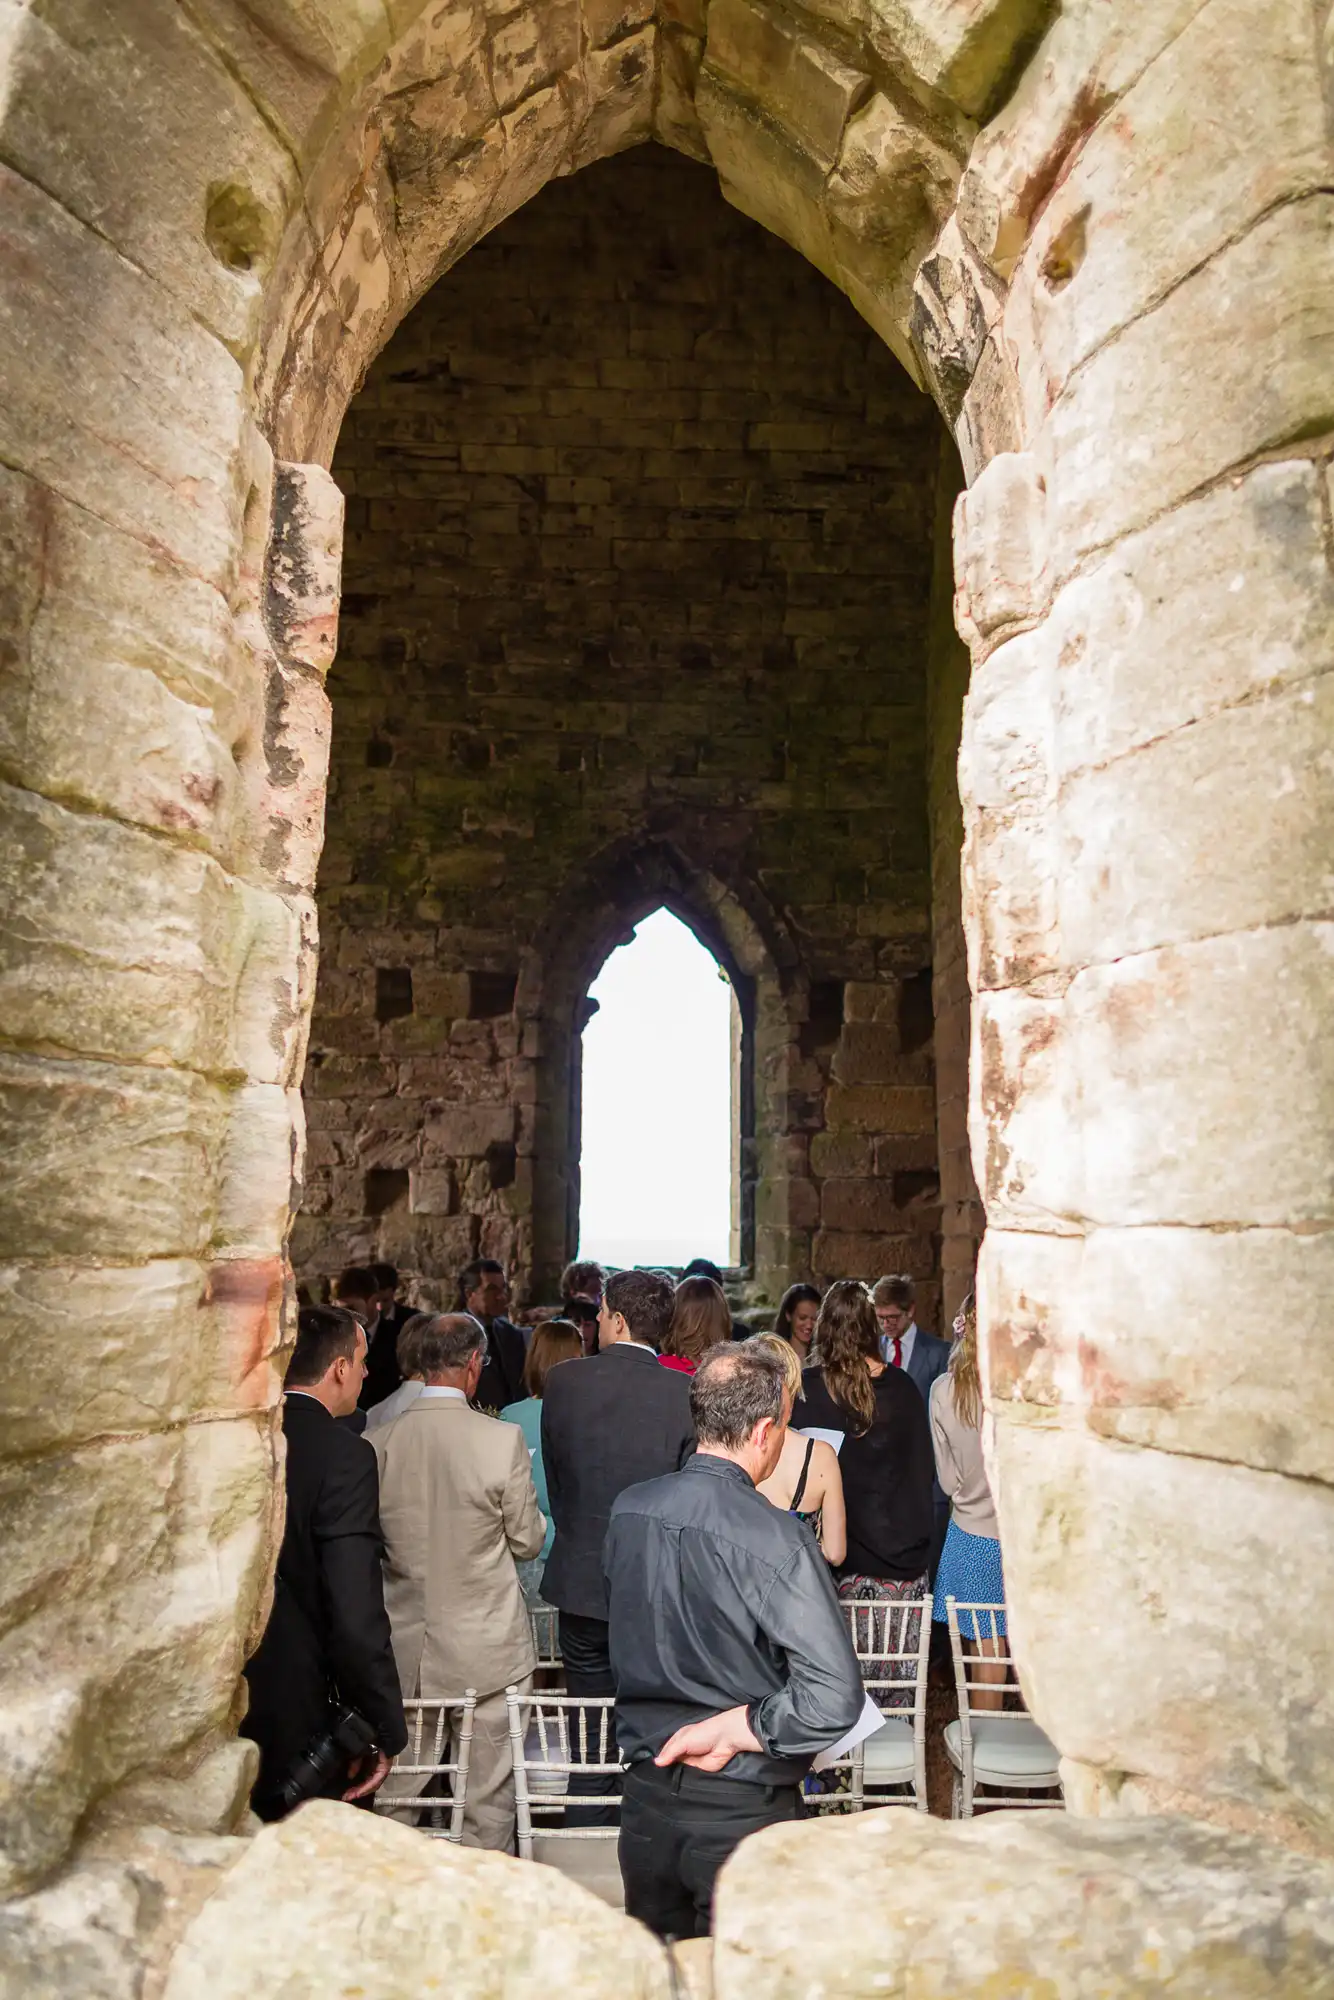 Group of people seated at a wedding ceremony inside an ancient stone building with a large arched window.